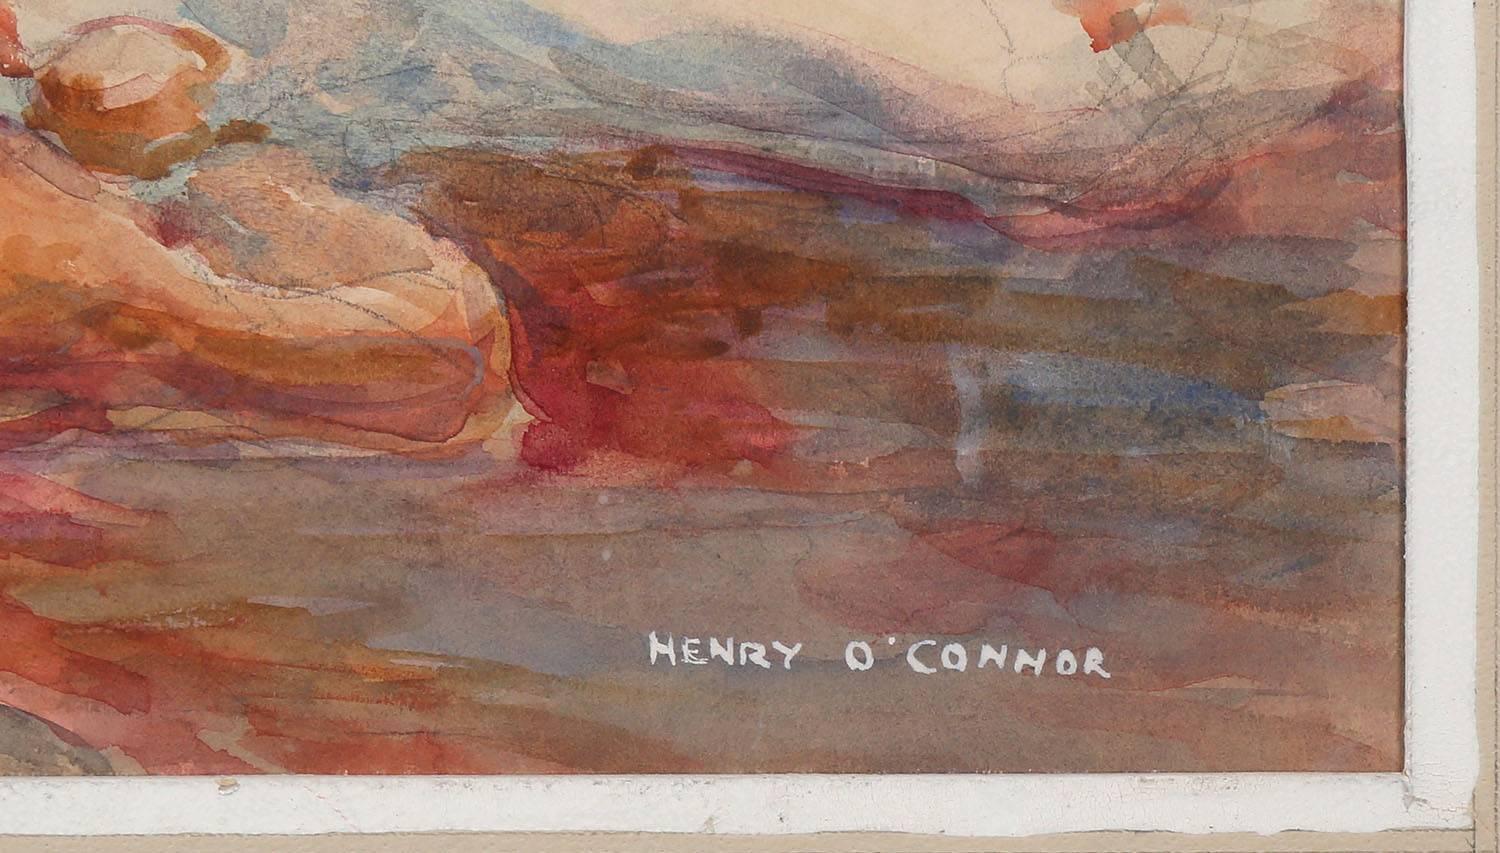 henry o connor